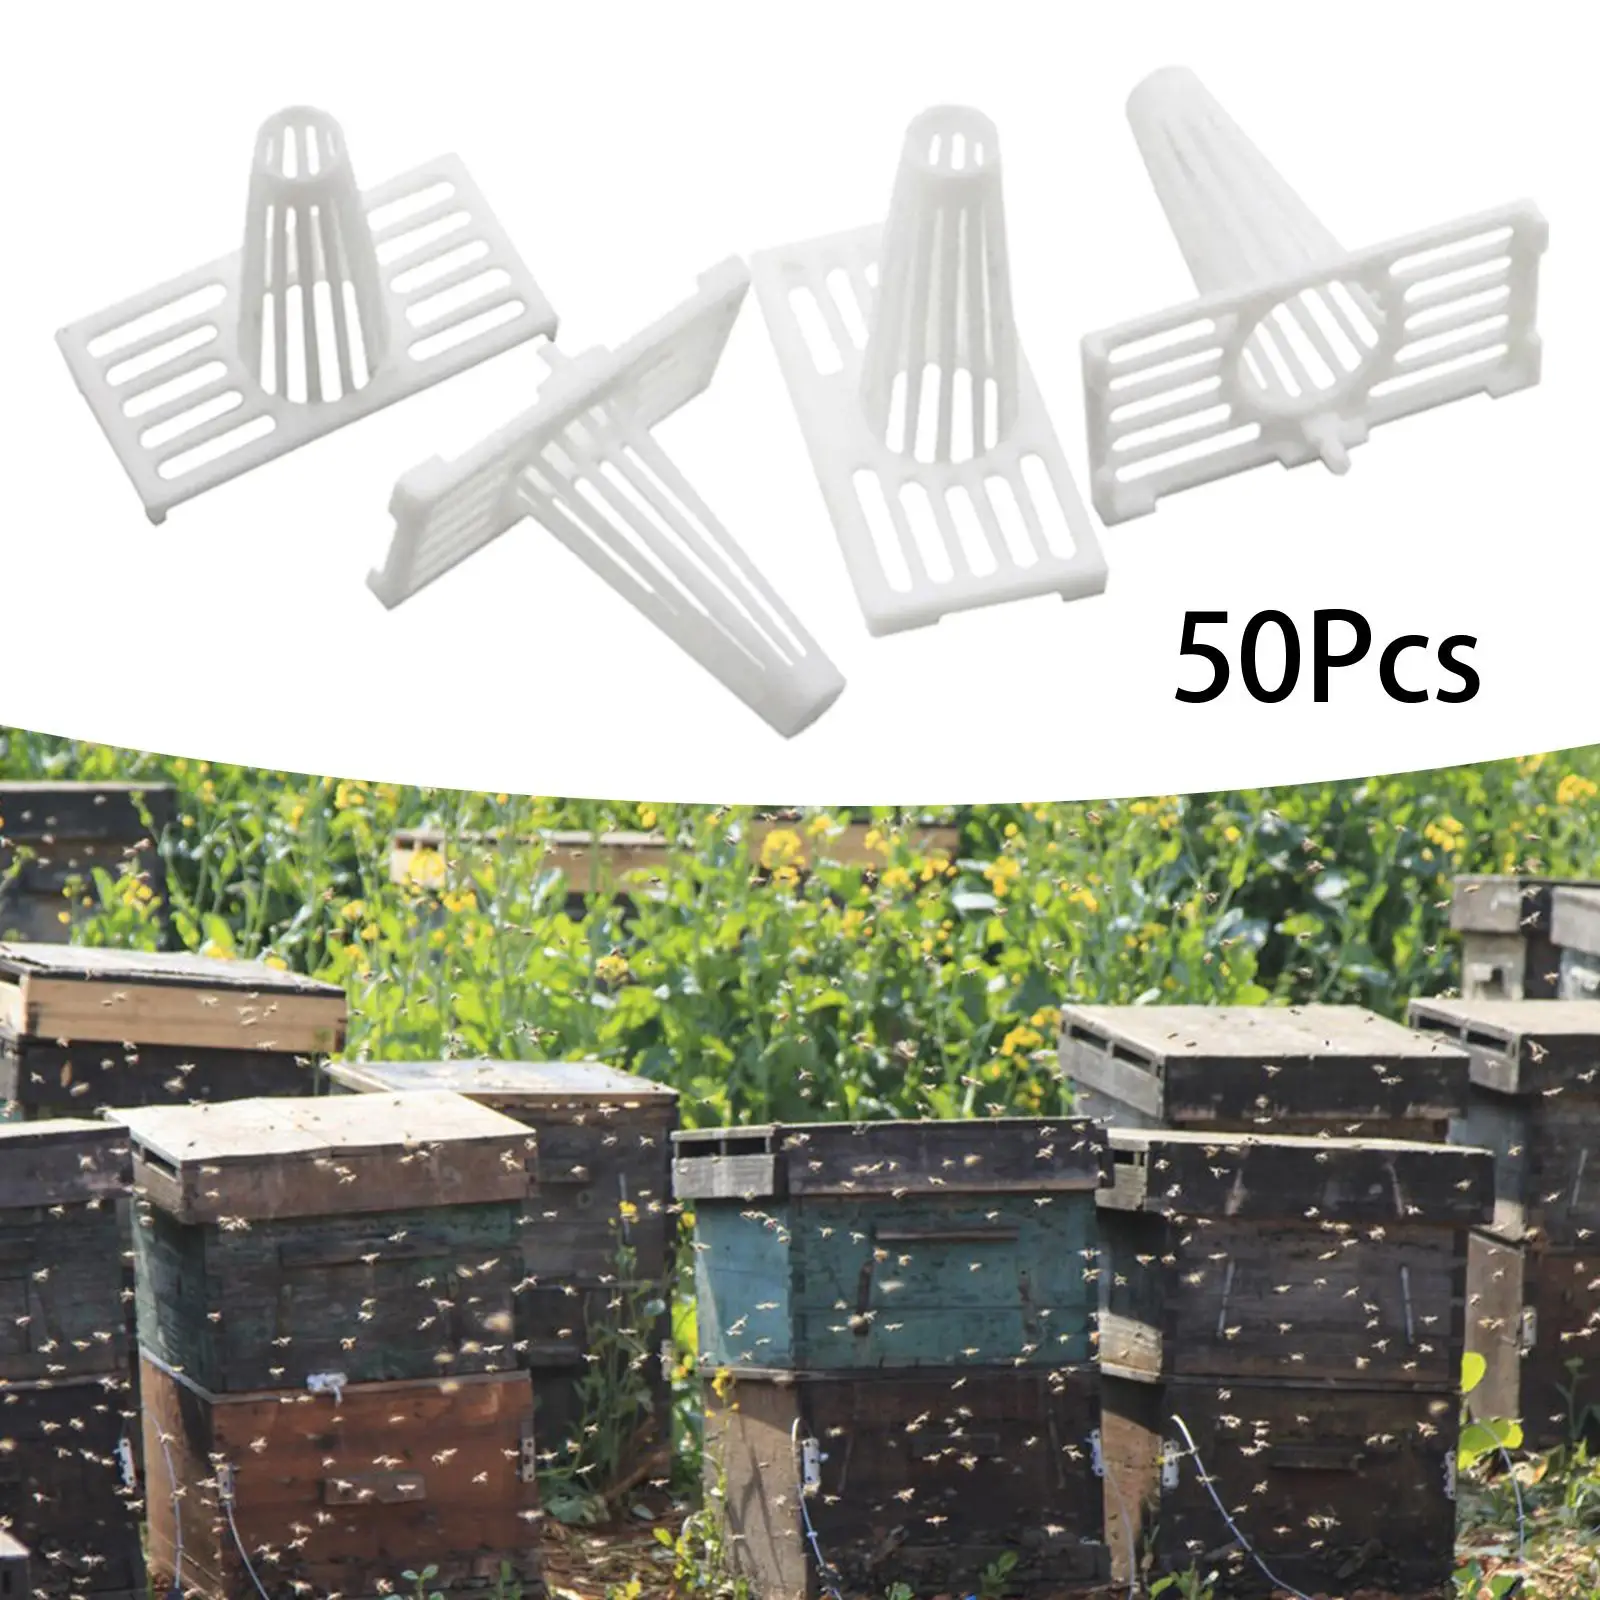 50x Bee Hive Frame Nest Gate Reusable Sturdy Spacing Bee Frames Farm Outdoor Beekeepers Tool Beehive Home Portable Anti Run